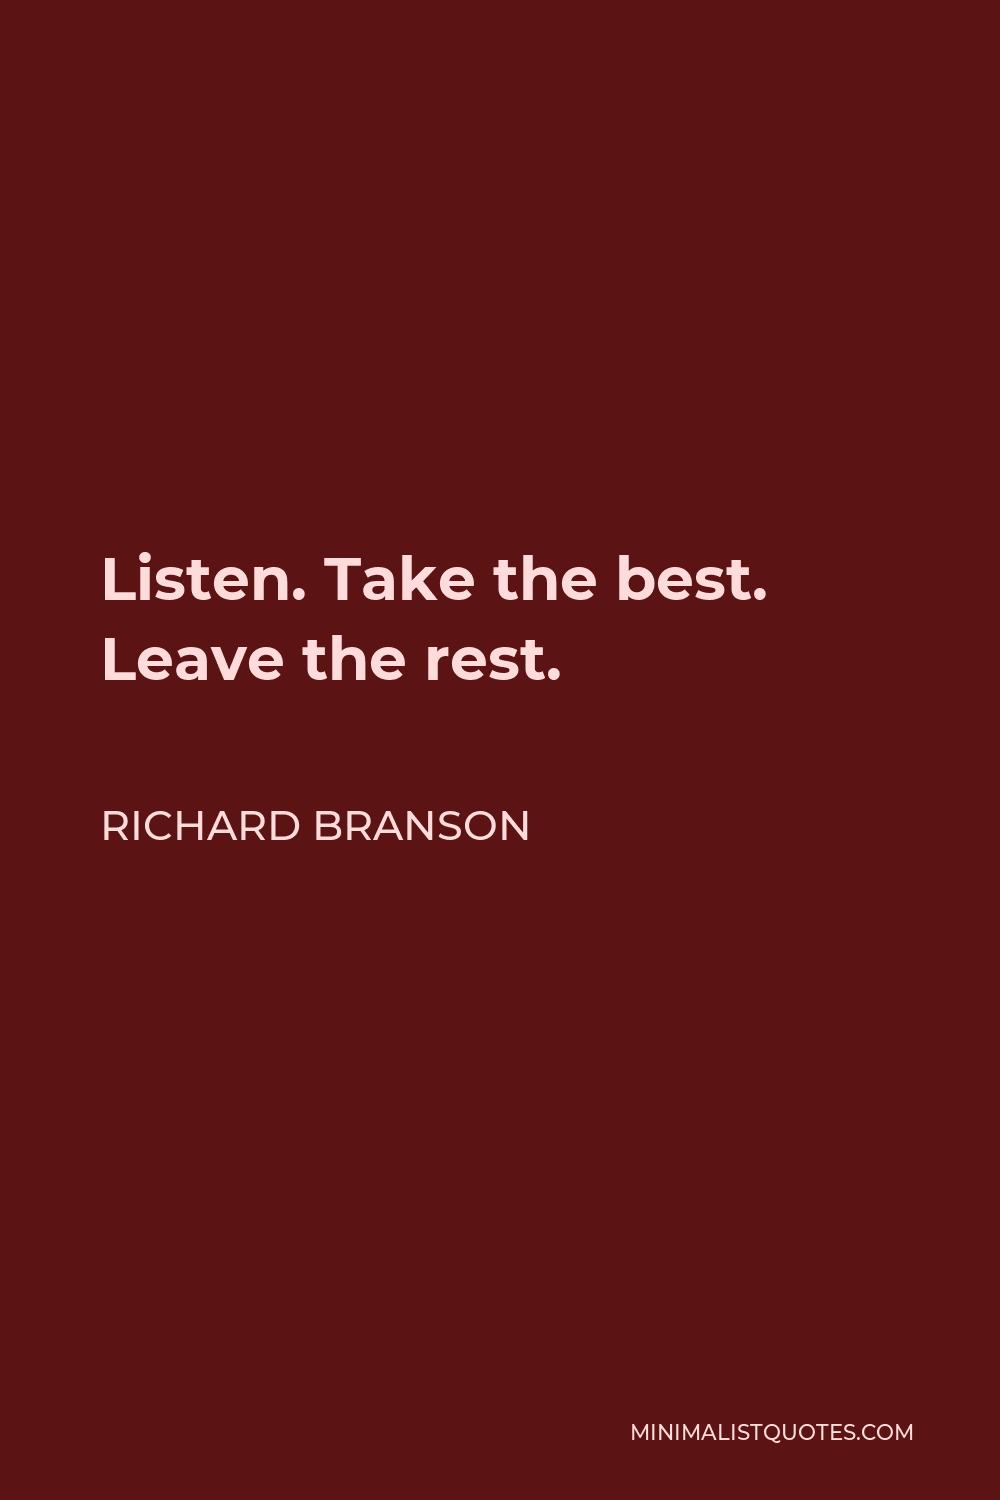 Richard Branson Quote - Listen. Take the best. Leave the rest.